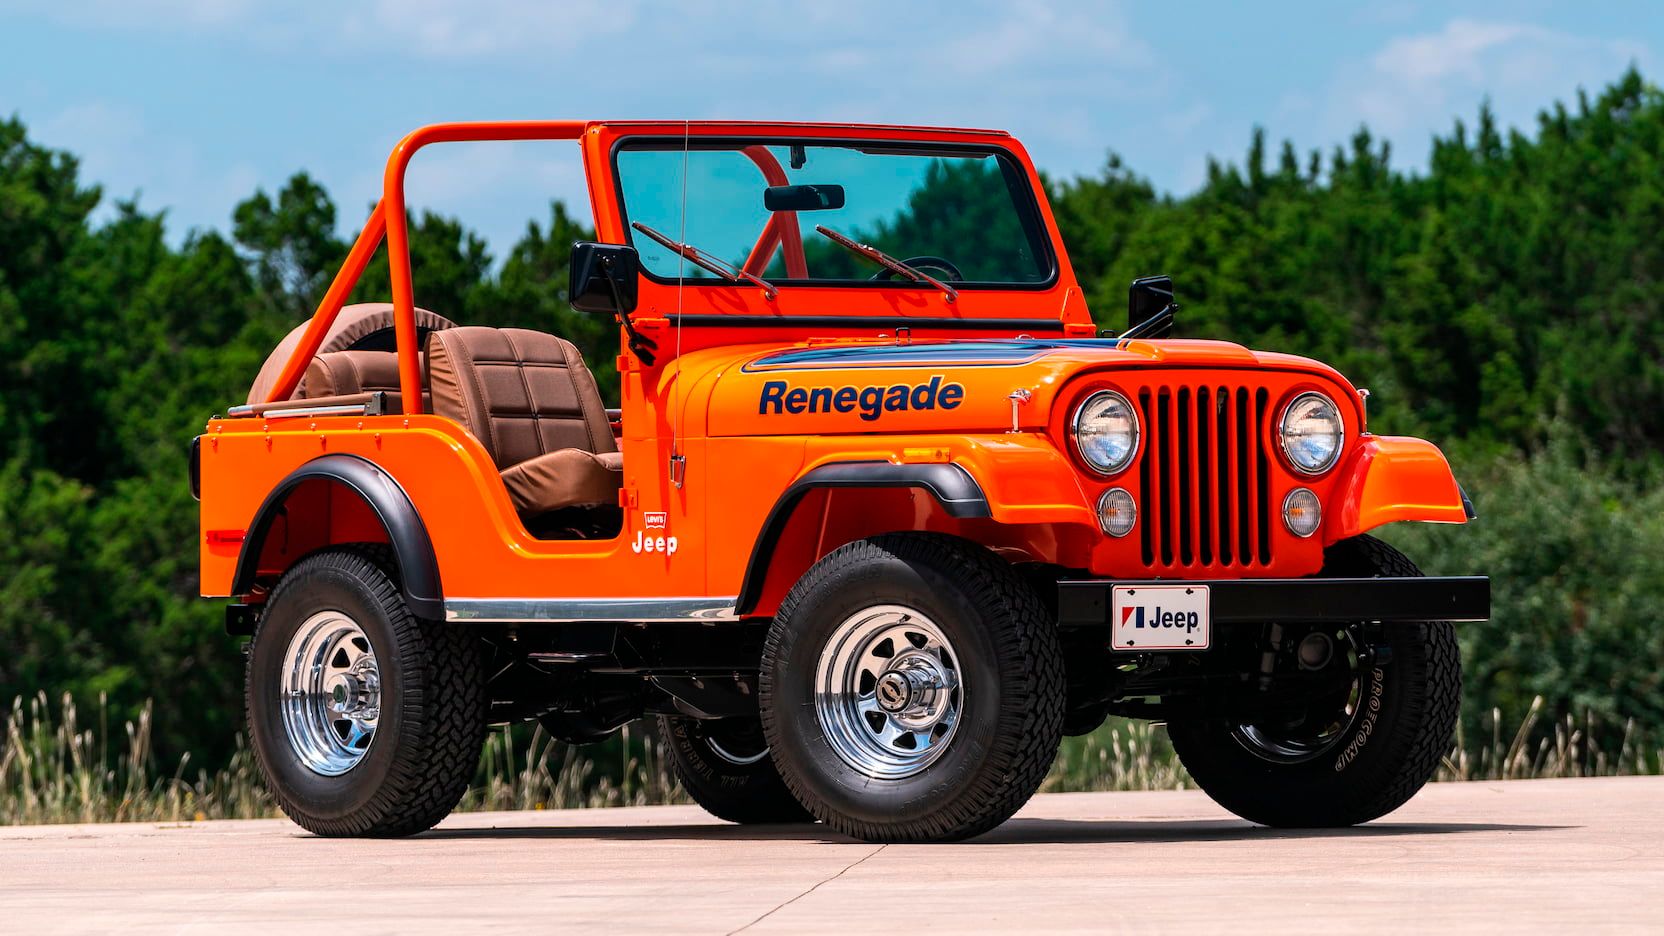 A parked Jeep CJ-5 from 1979